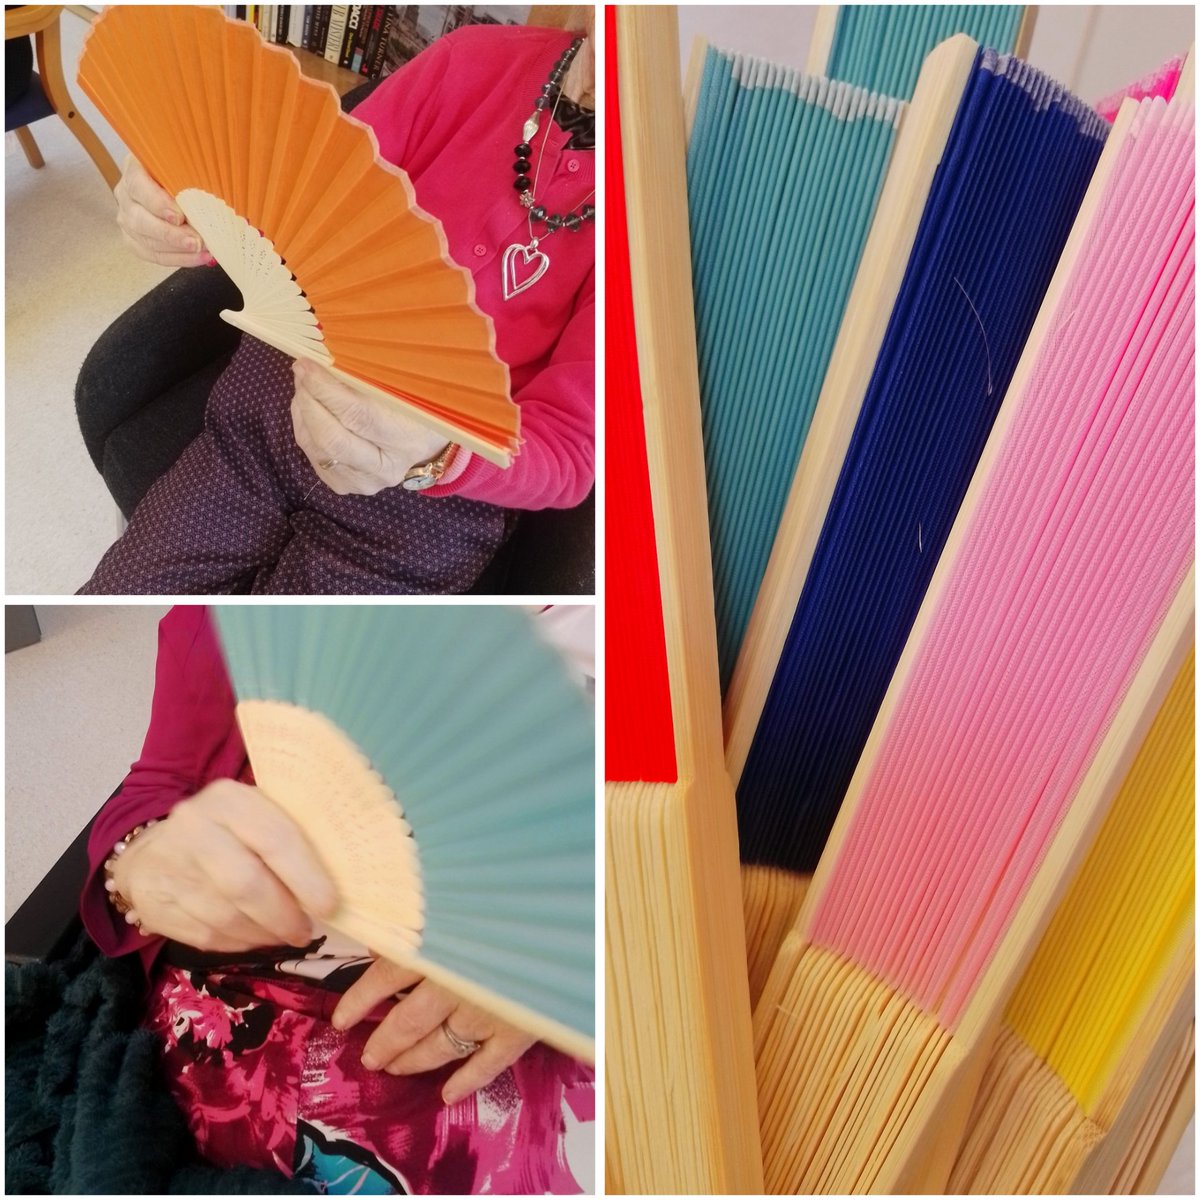 The #HollybrookLodge was bursting with colour at our dance class this week when Olwyn Lyons brought in fans to use as props.
Thanks again to @Age_Opp for supporting this wonderful new addition to our timetable. 
#creativeaging
#danceforparkinsons
@DanceIreland @EngagingDemIrl